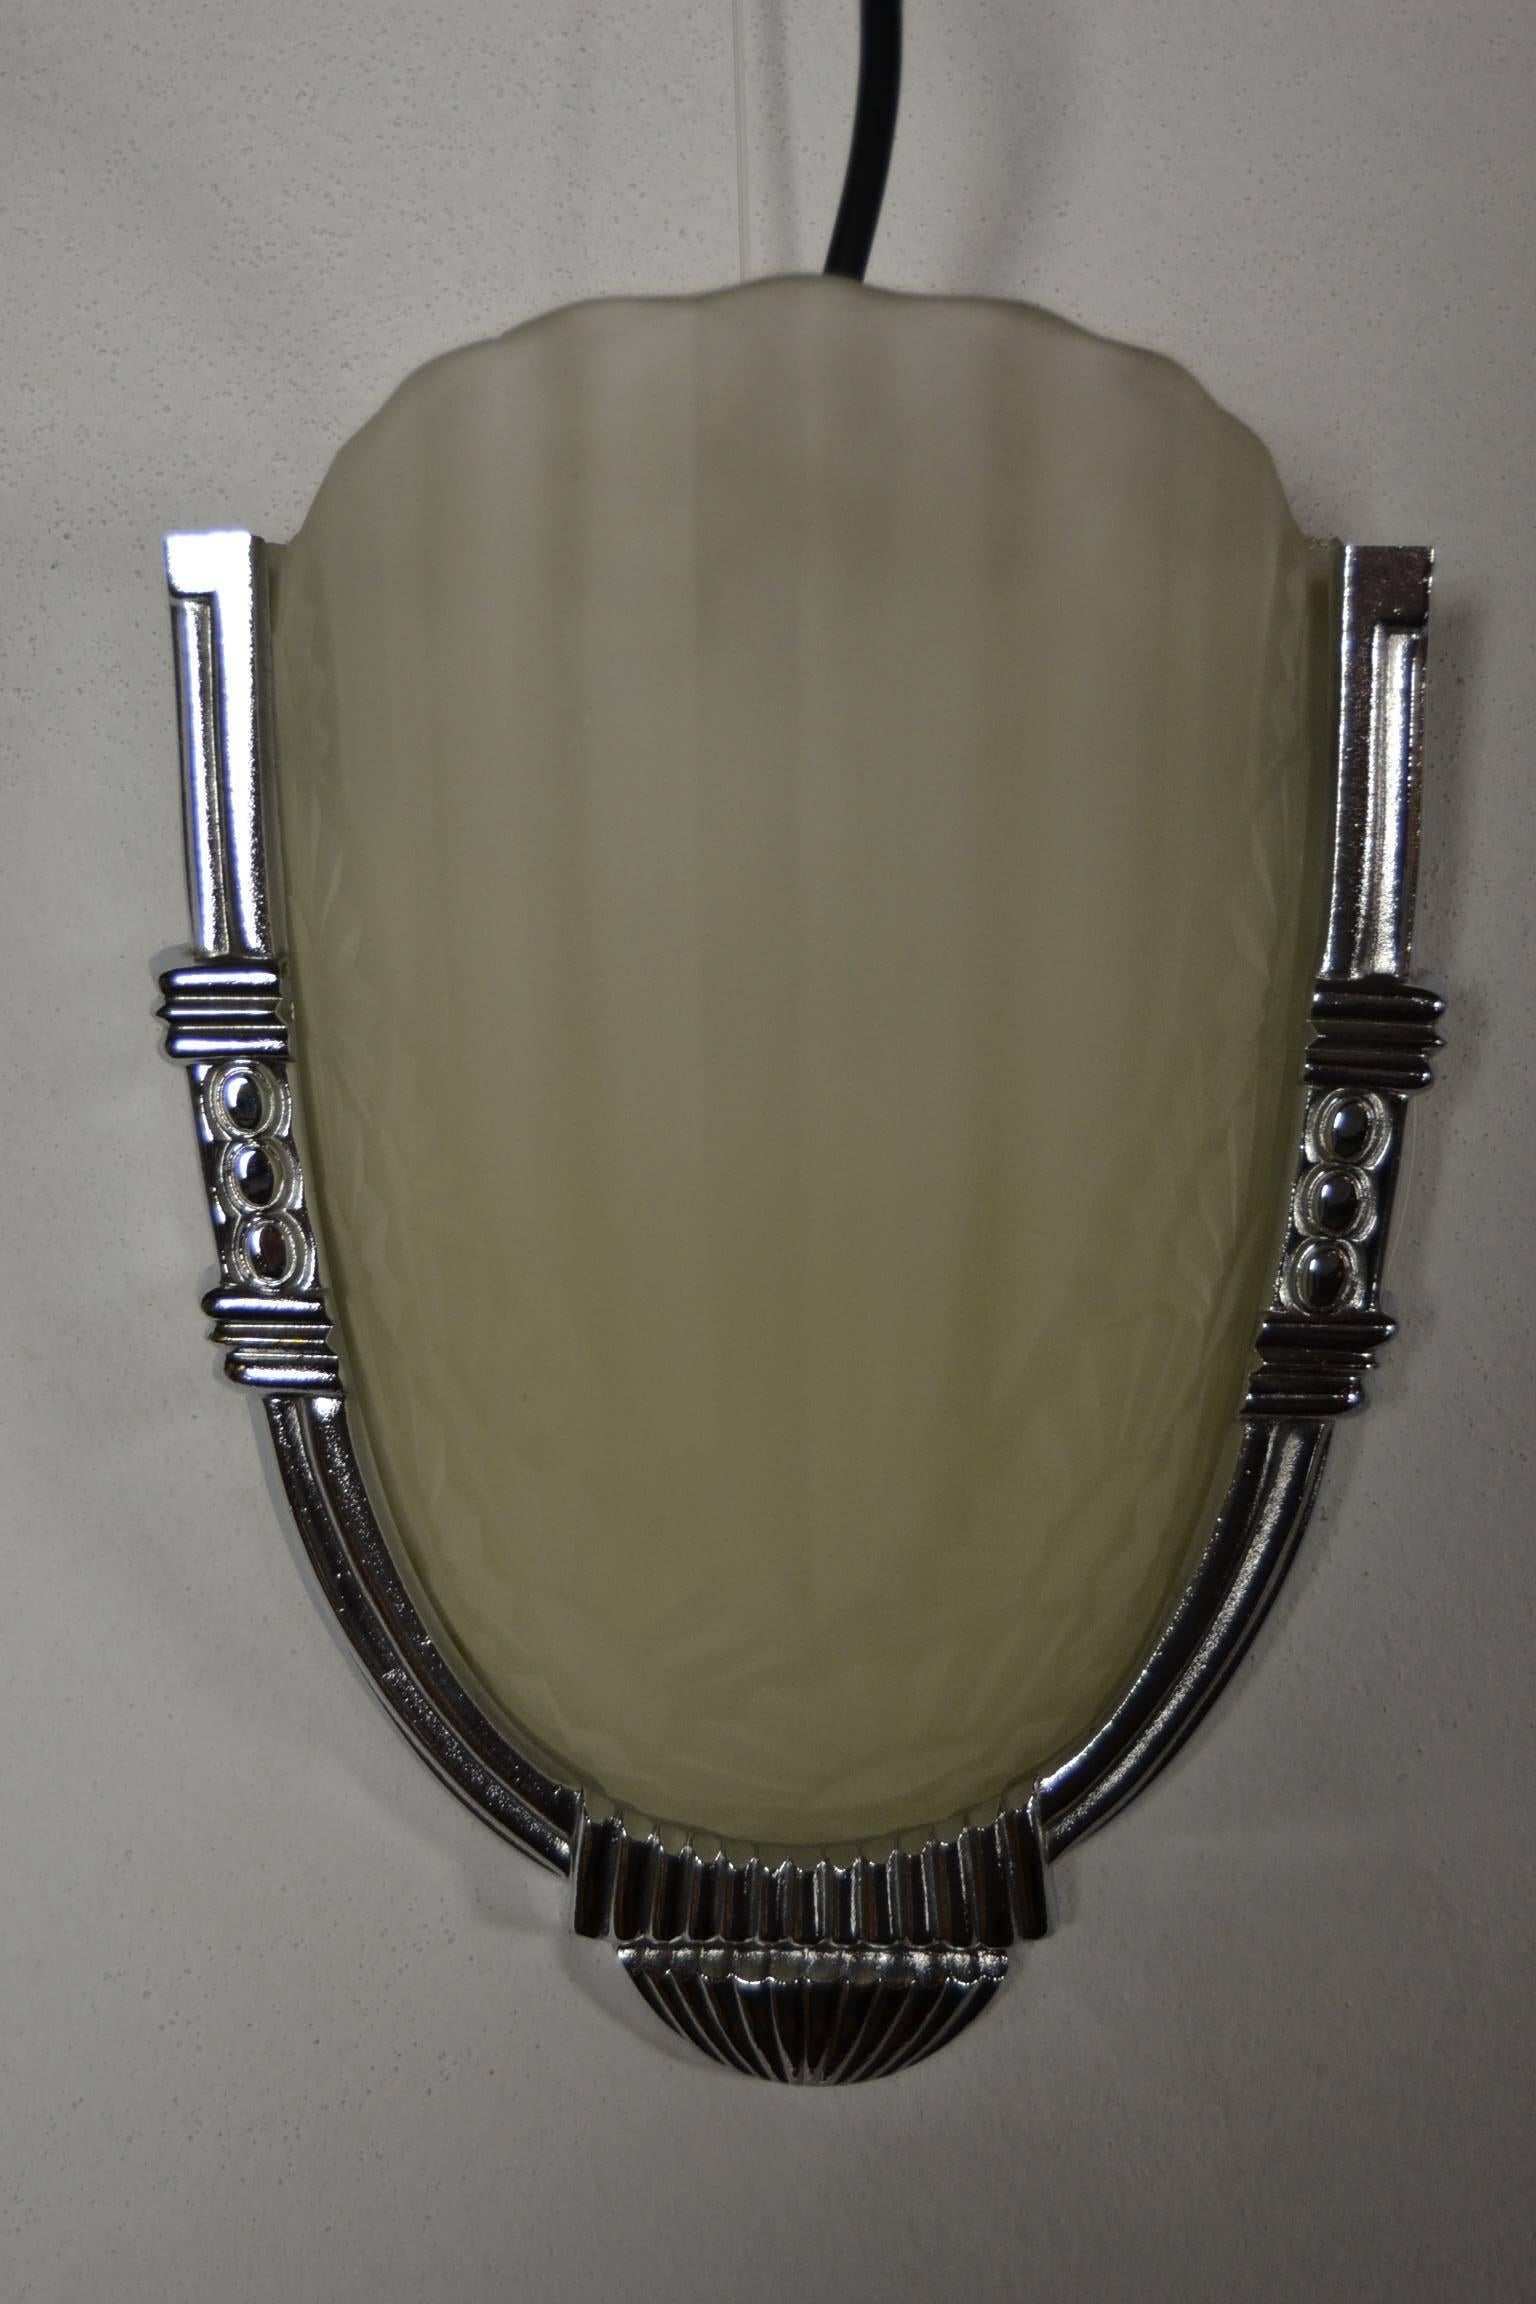 Set of four French Art Deco wall sconces by Degue.
Molded clear frosted glass shades decorated with geometric flowers - floral motif and polished silver bronze frames.
All in very good used condition.